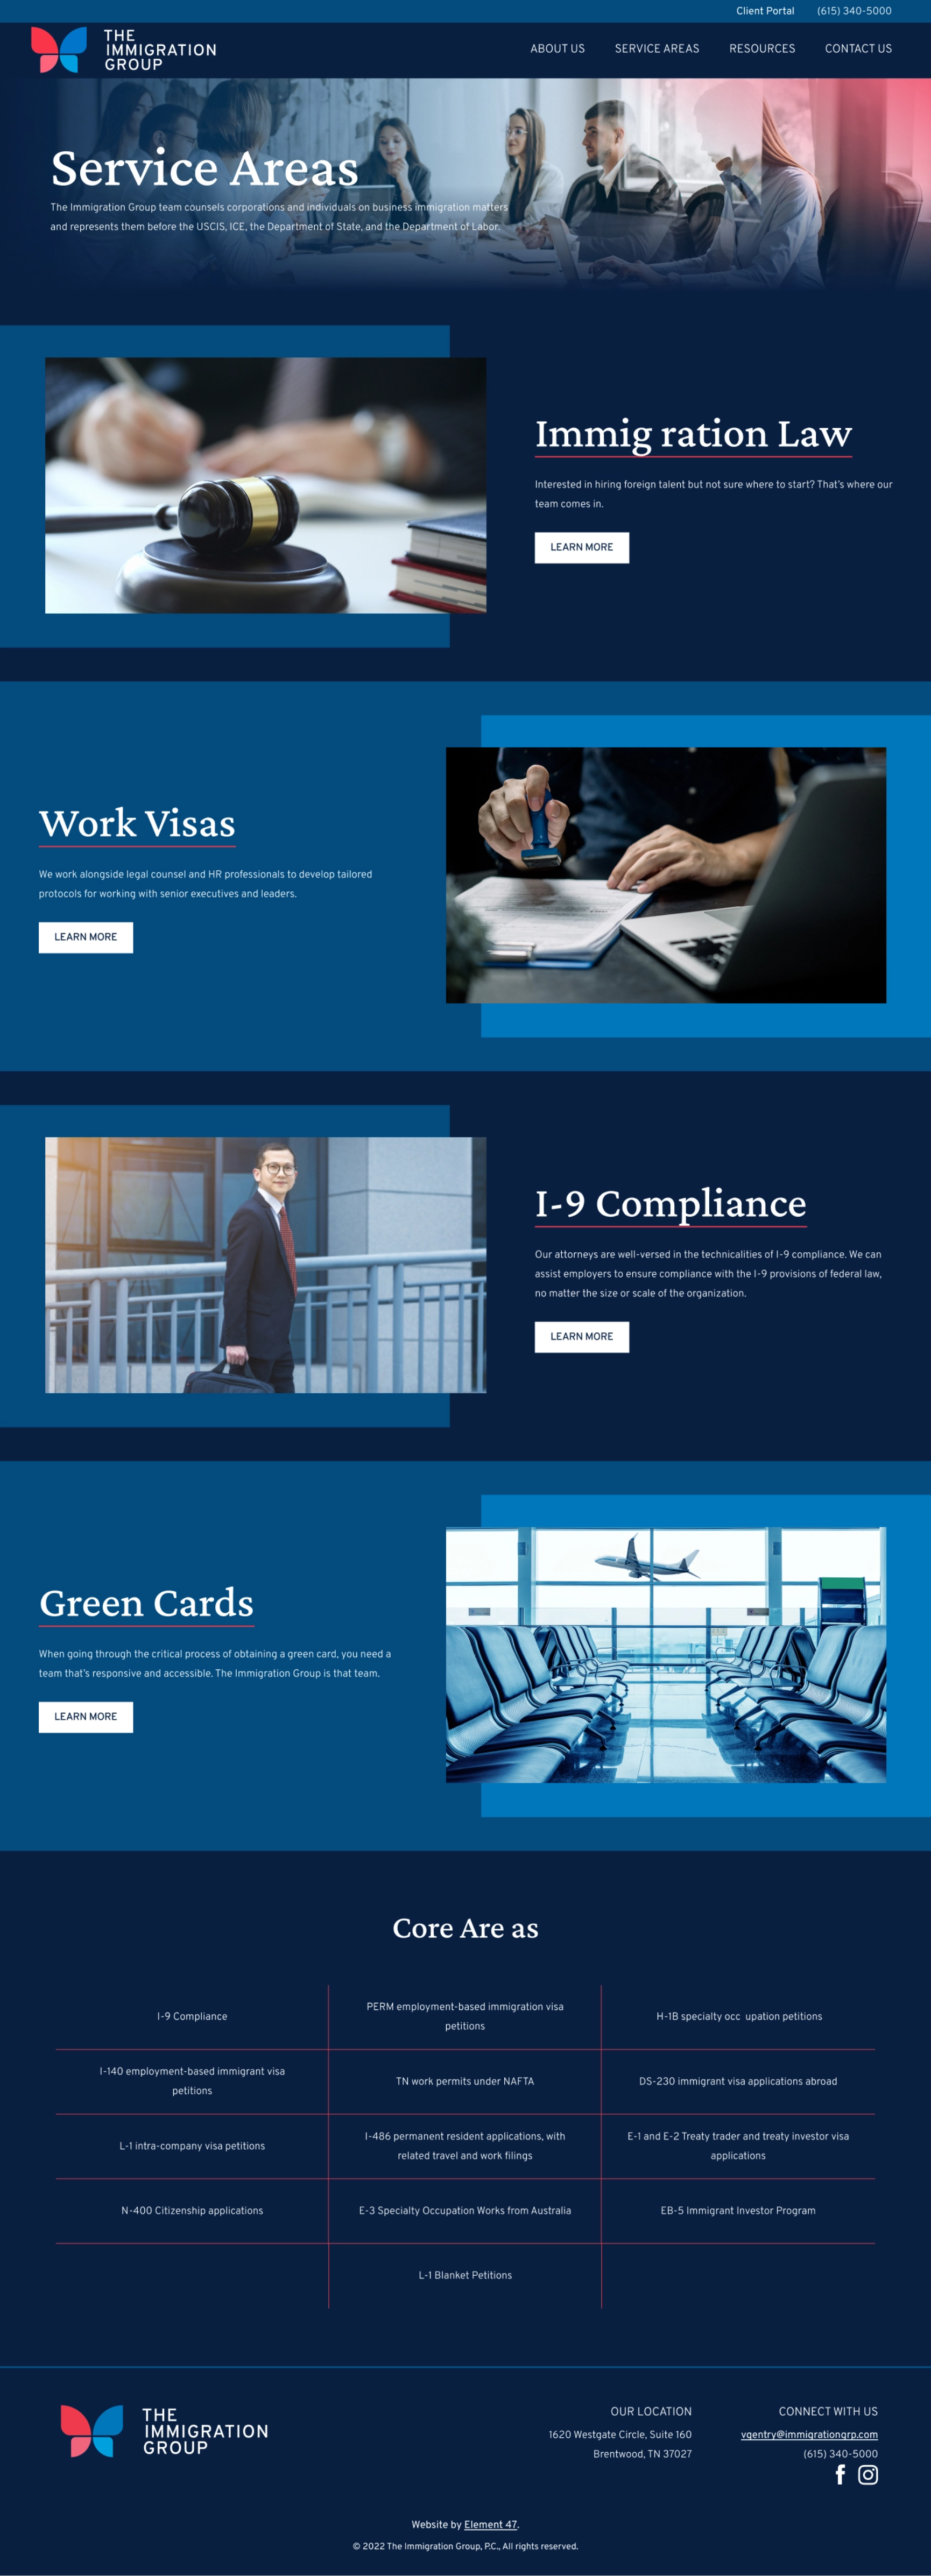 The Immigration Group services areas page design